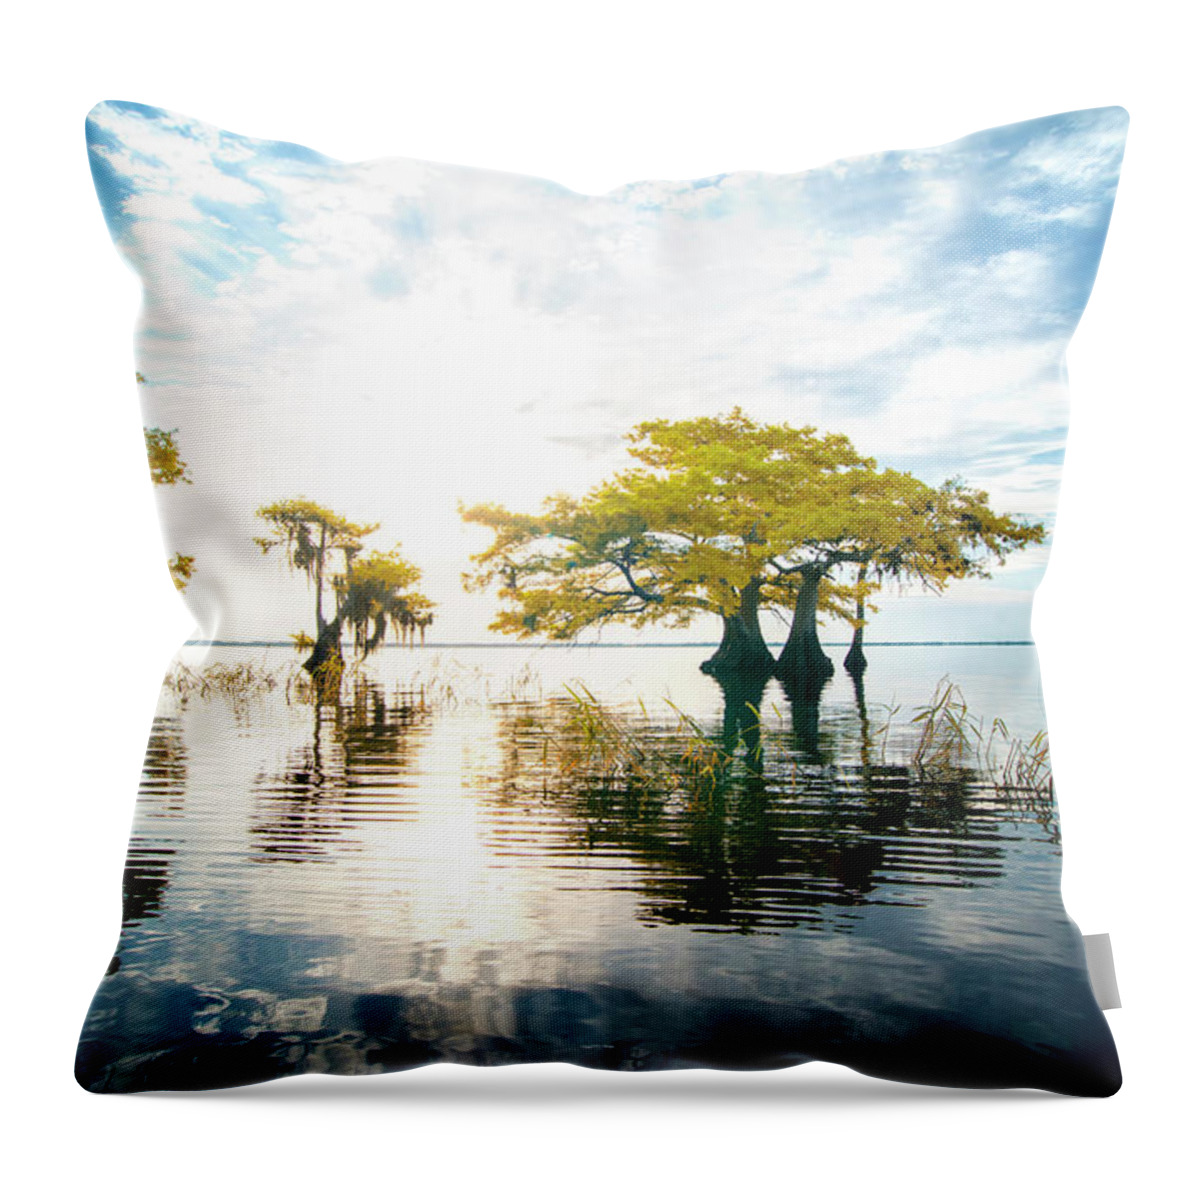 Crystal Yingling Throw Pillow featuring the photograph Birth of Morning by Ghostwinds Photography